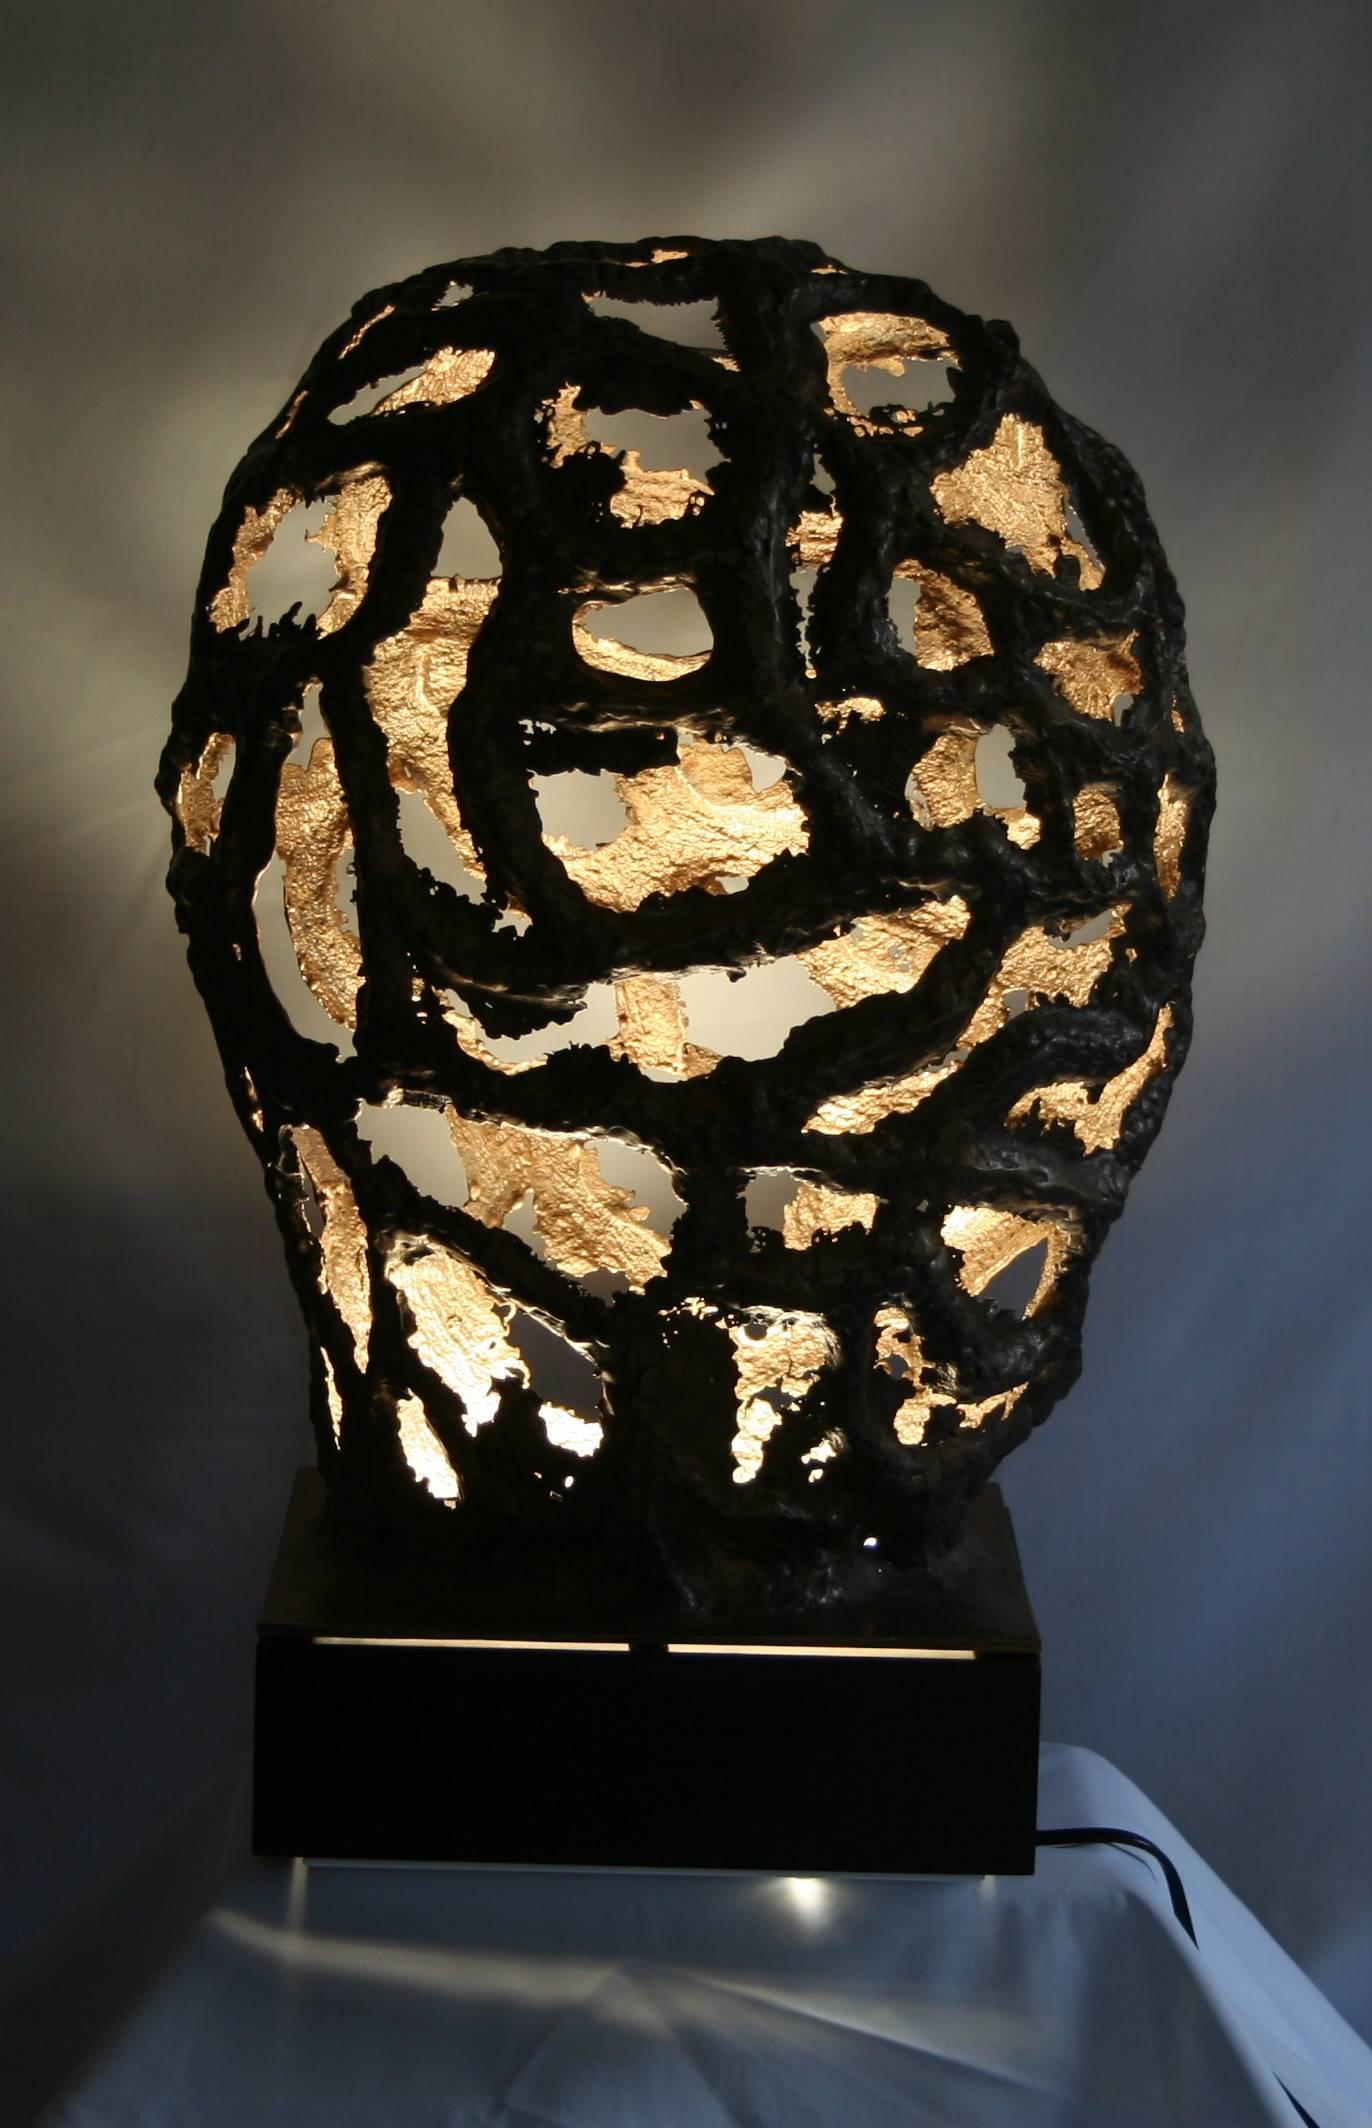 Table lamp in bronze named Synapse, base in wood, cast in sand - unique model designed directly in sand. Signed by sculptor and artist Robert Sobocinski for Arriau.